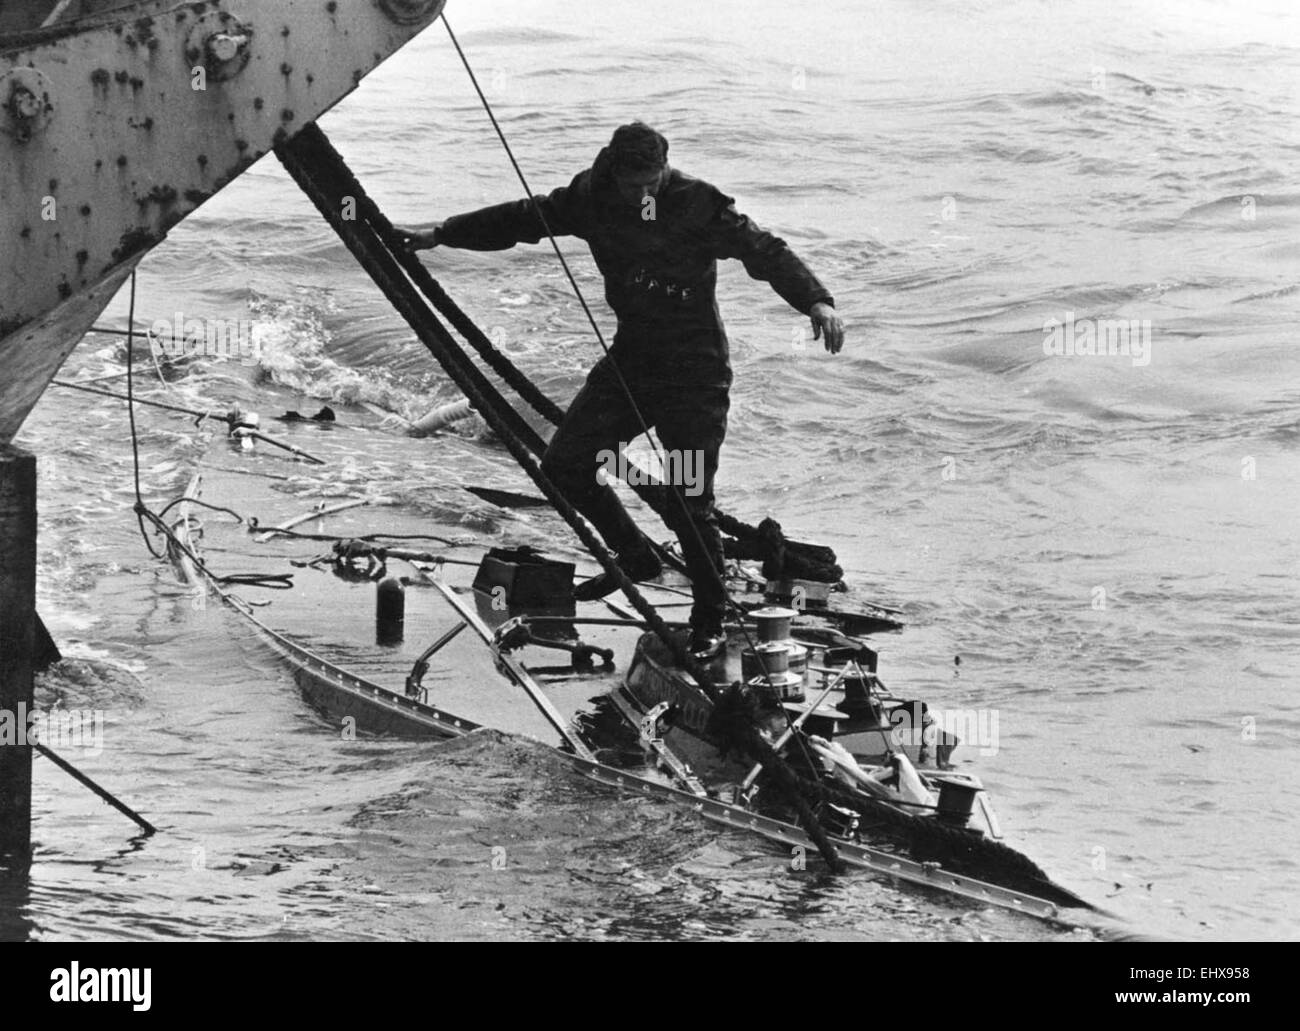 AJAX NEWS PHOTOS - 10TH SEPTEMBER,1974. SHOREHAM, ENGLAND. - WRECK SALVAGED - 741009/741109/GR1. A DIVER LEAPS FROM THE SALVAGE BARGE ONTO ALL THAT REMAINS OF THE HULL OF MR HEATH'S YACHT MORNING CLOUD AS SHE WAS BROUGHT INTO SHOREHAM HARBOUR. THE £45,000 OCEAN RACER, THE THIRD WHICH MR HEATH HAS OWNED, WAS WRECKED IN A GALE OFF THE SUSSEX COAST ON SEPT 2ND,1974. TWO MEN LOST THEIR LIVES IN THE TRAGEDY. A YACHT SURVEYOR AT THE SCENE IN SHOREHAM SAID THE BOAT WAS A TOTAL LOSS. MOST OF THE STARBOARD SIDE WAS MISSING AND THE MAST AS WELL AS THE ENGINE HAD GONE. PHOTO:JONATHAN EASTLAND/AJAX REF:74 Stock Photo